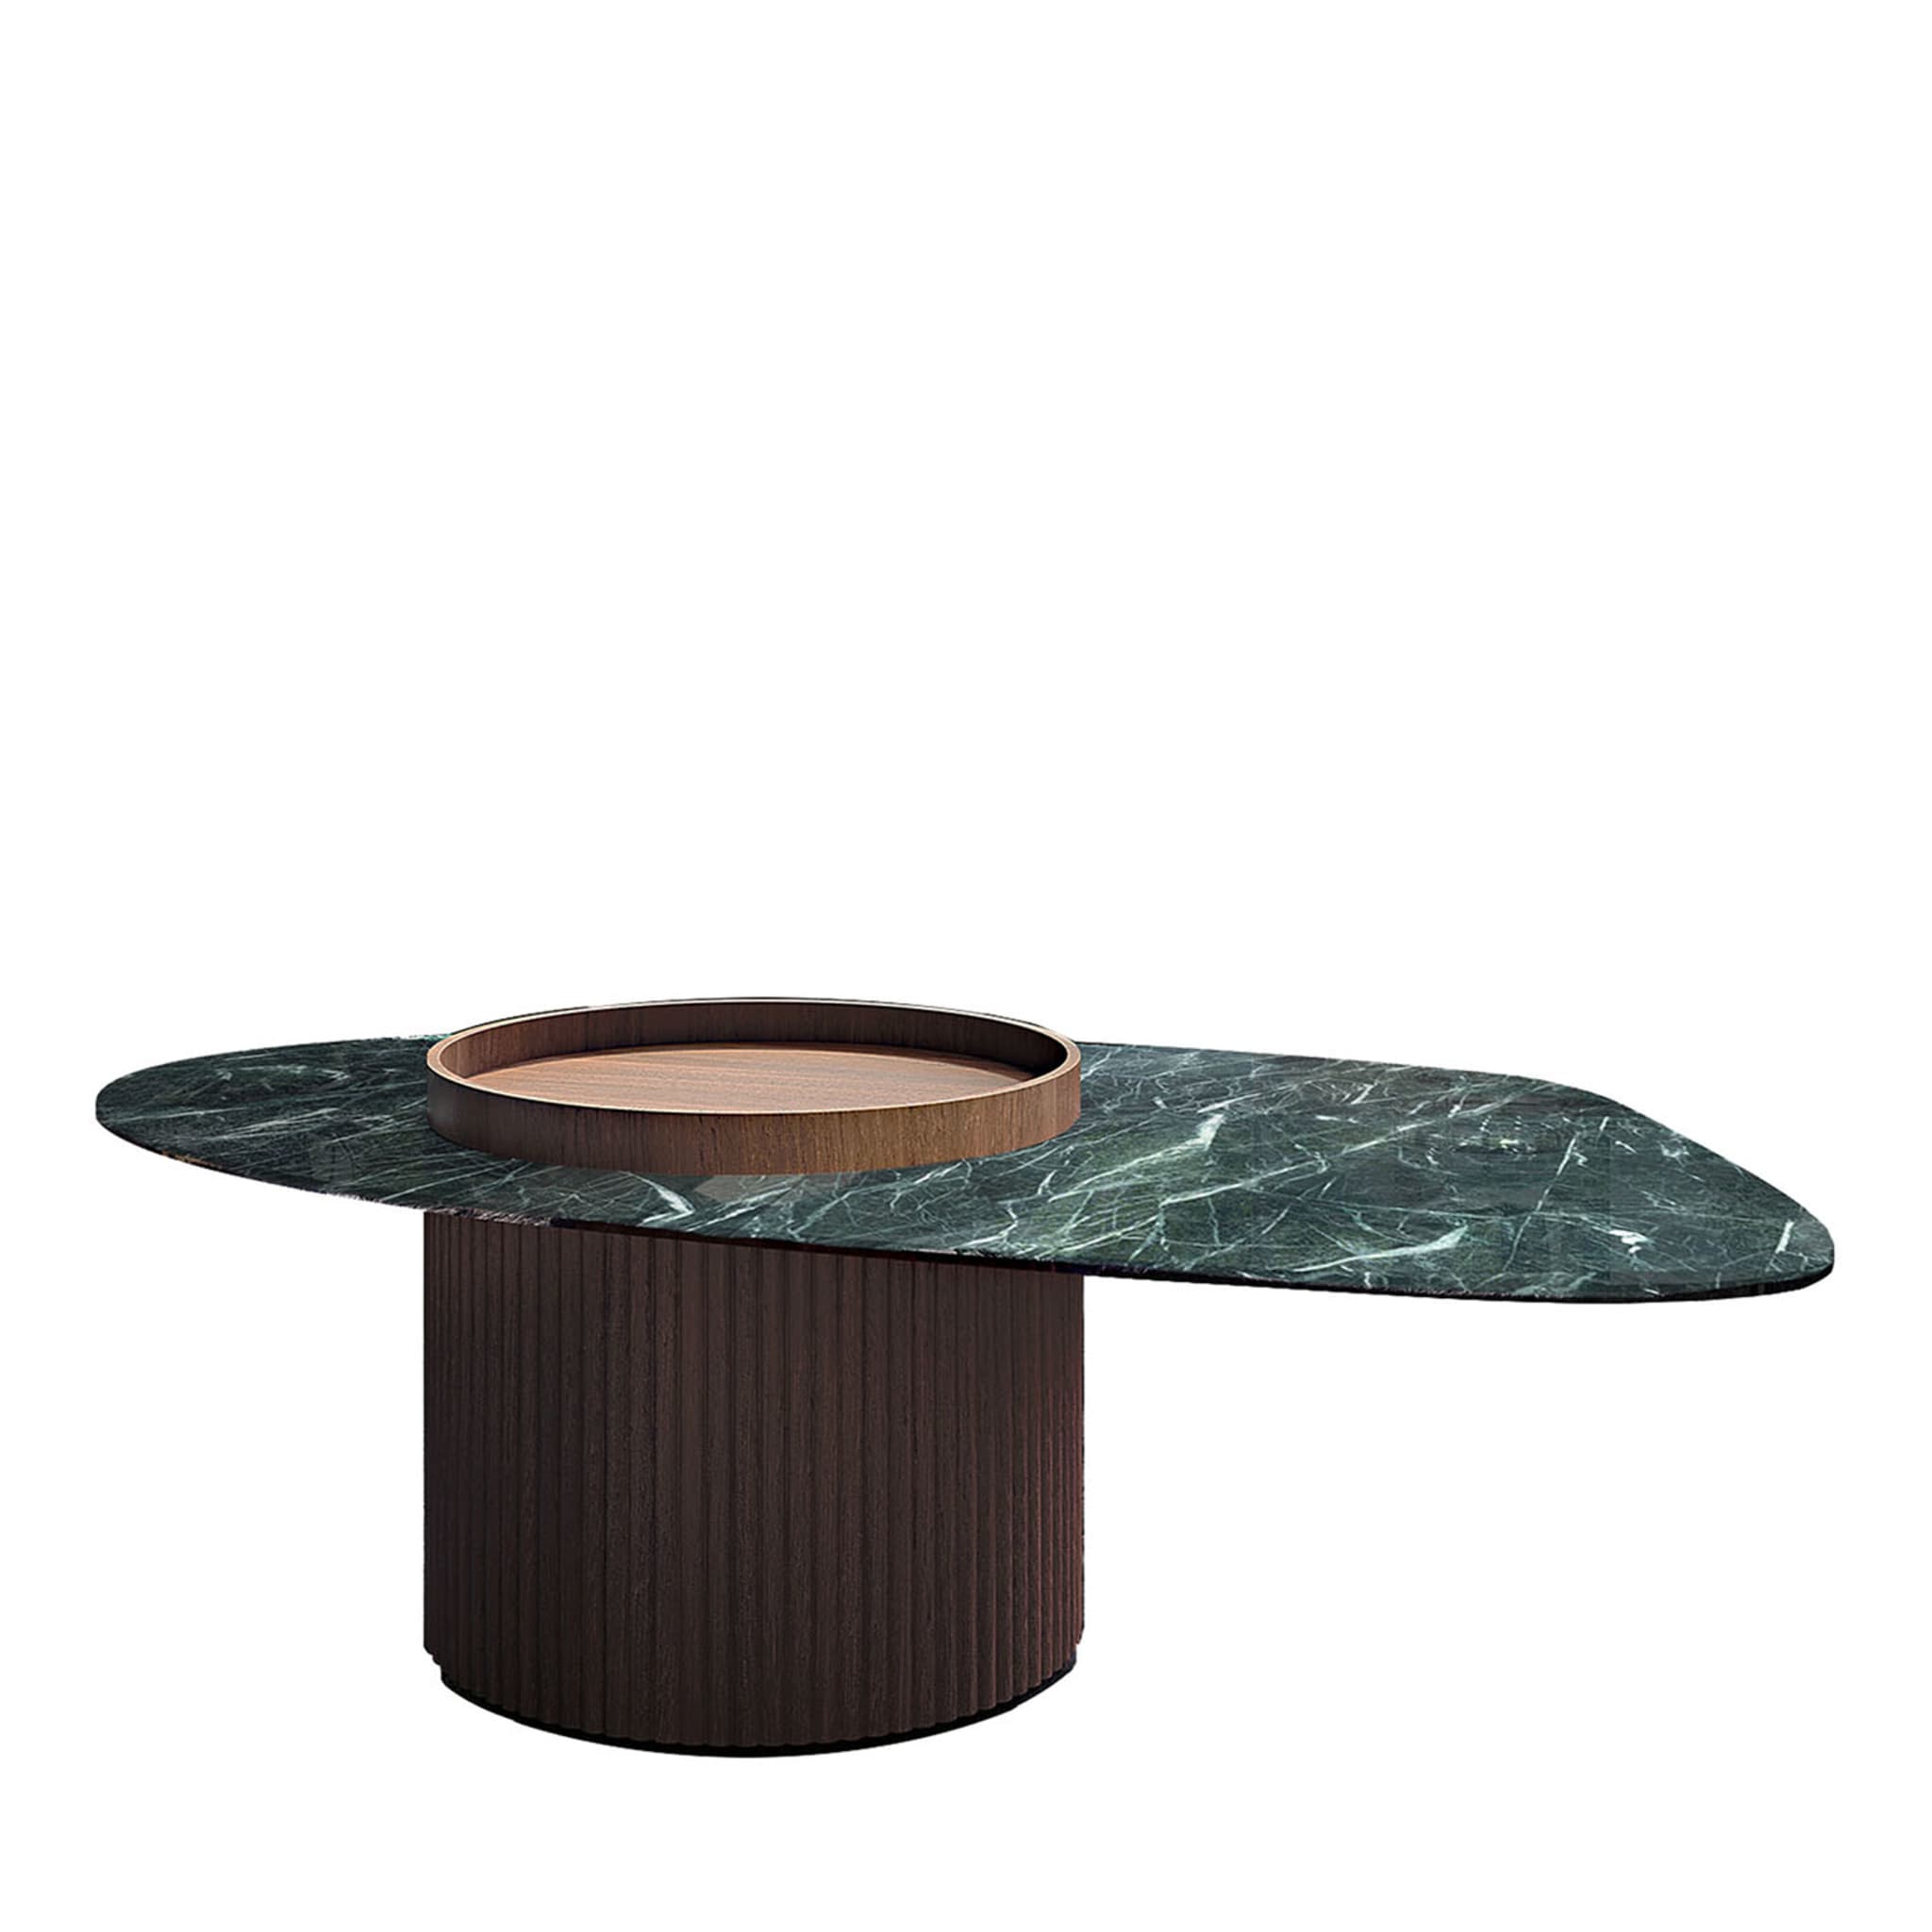 Opale St. Denis Shiny Earthenware Coffee Table - Main view